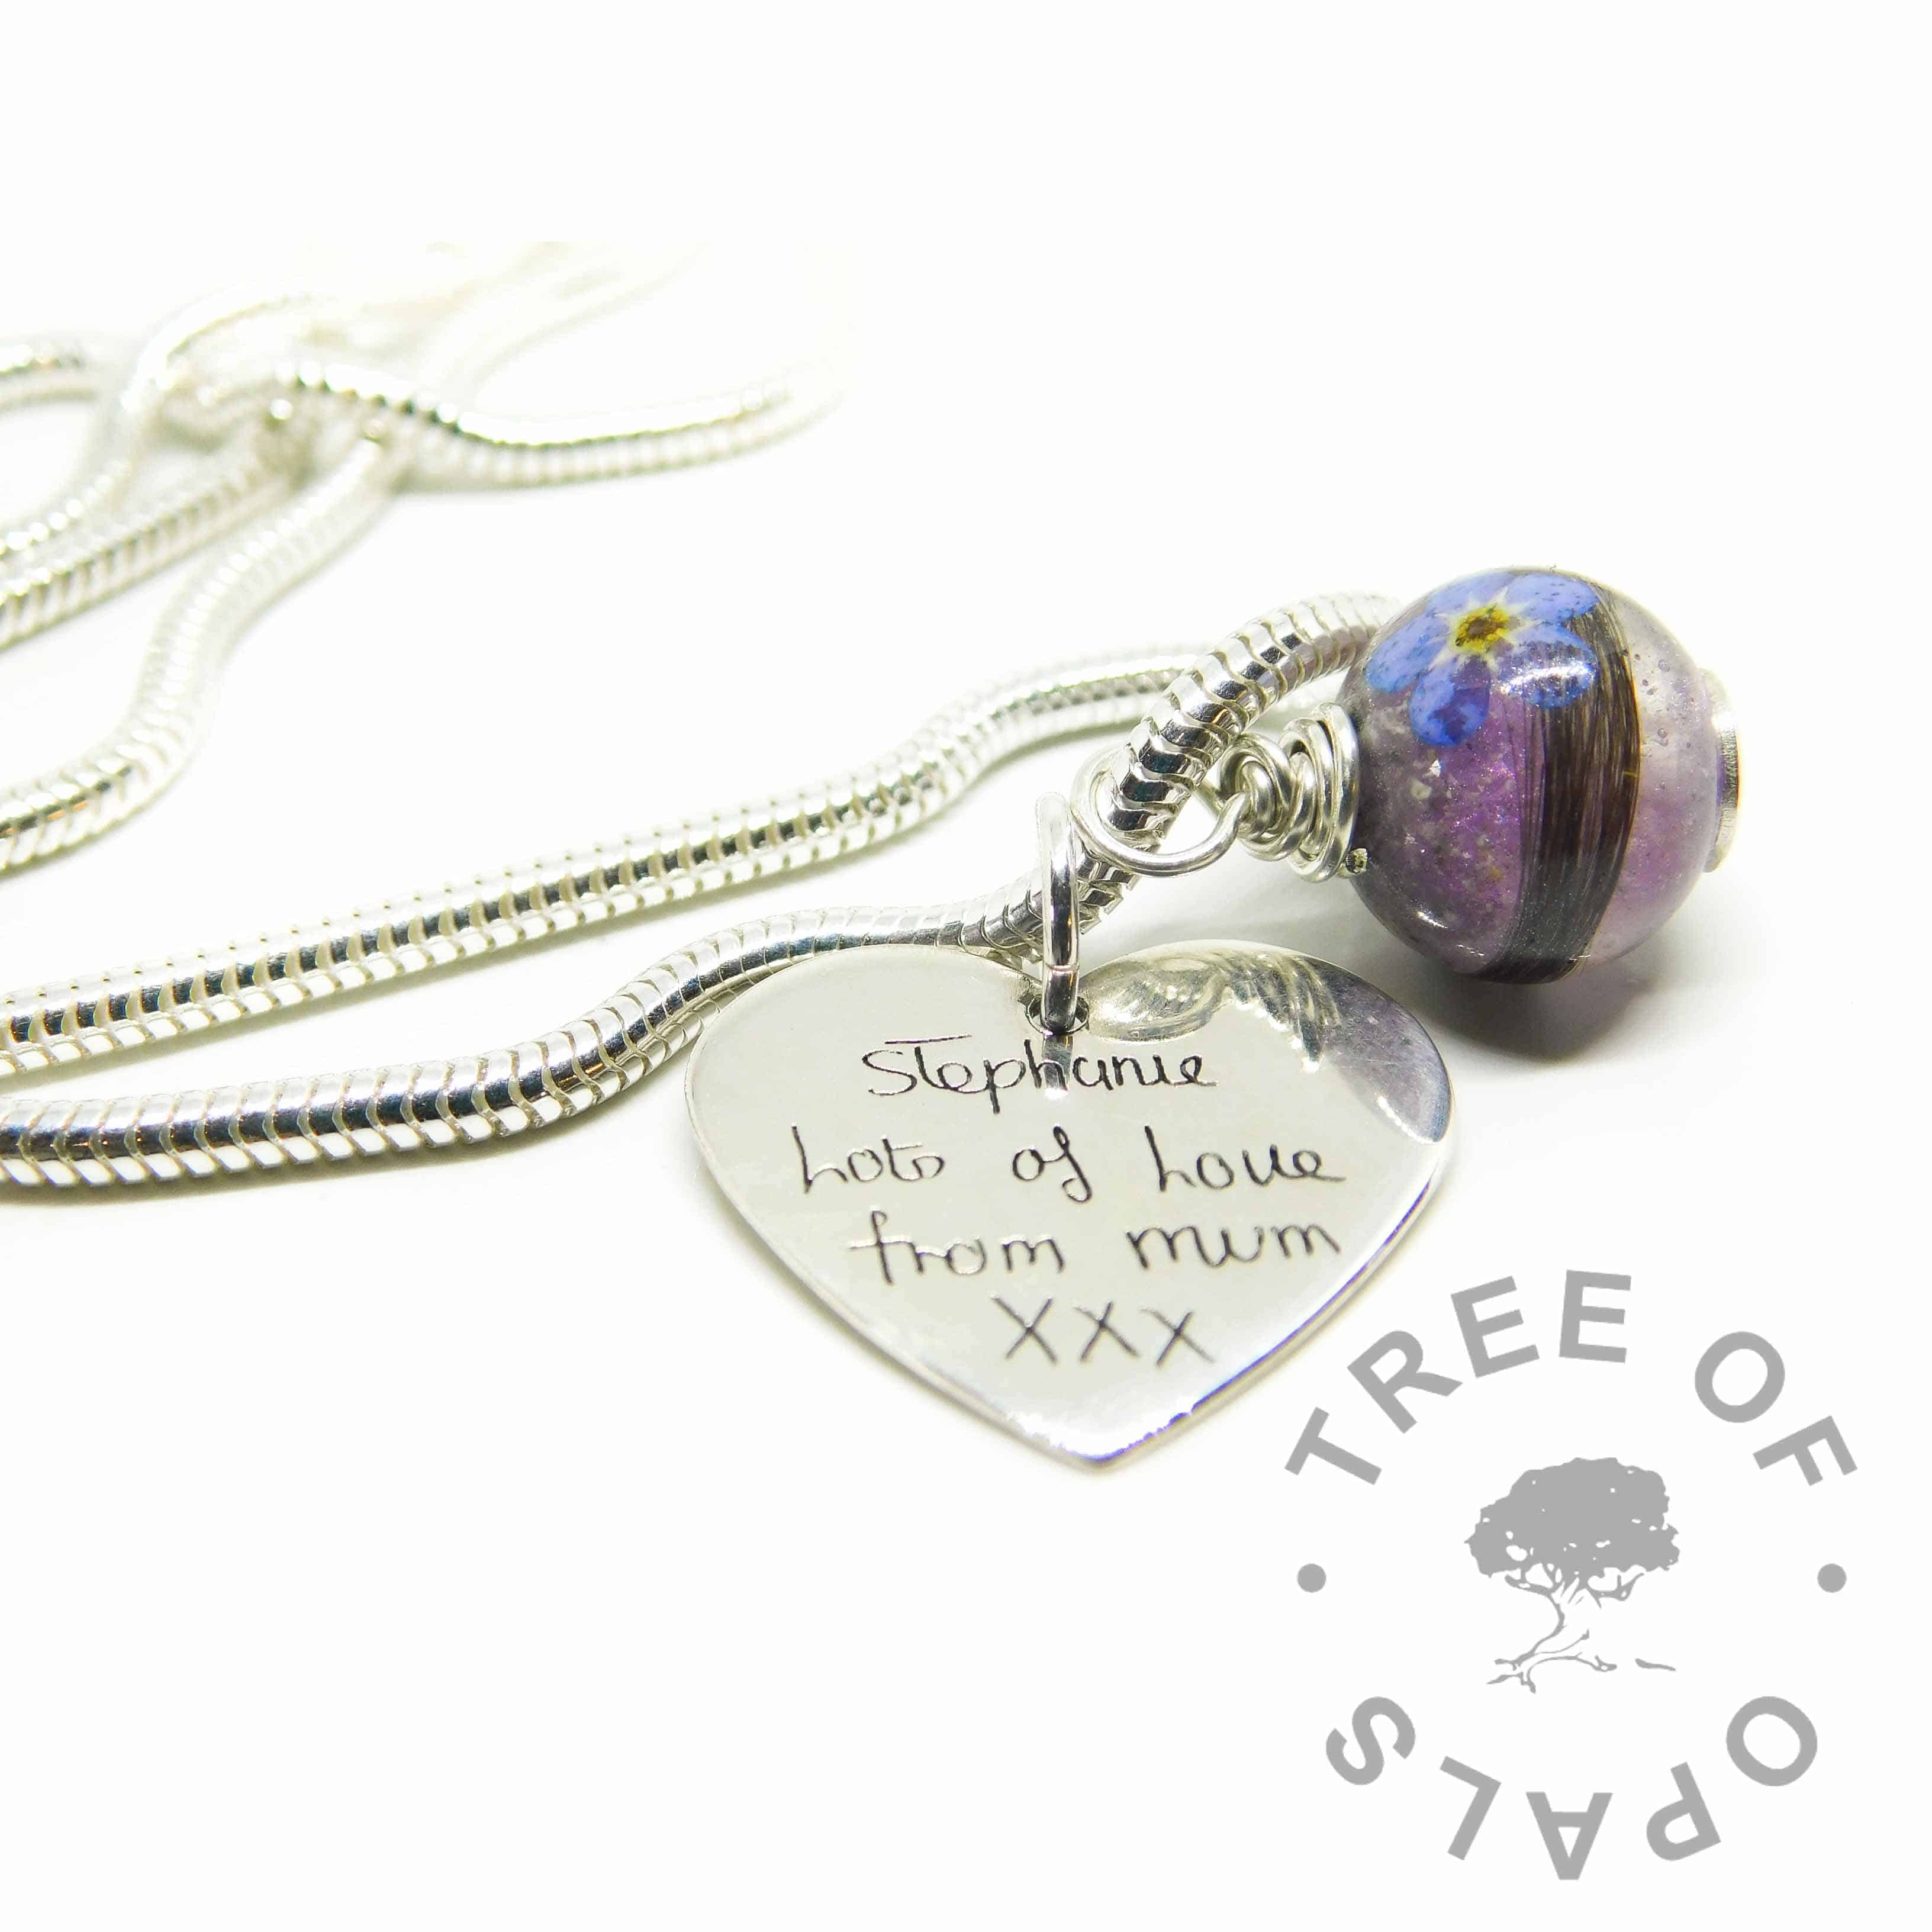 Hair orb with orchid purple and forget me not. Engraved medium heart pendant, handwriting, shown on a medium heavy snake chain